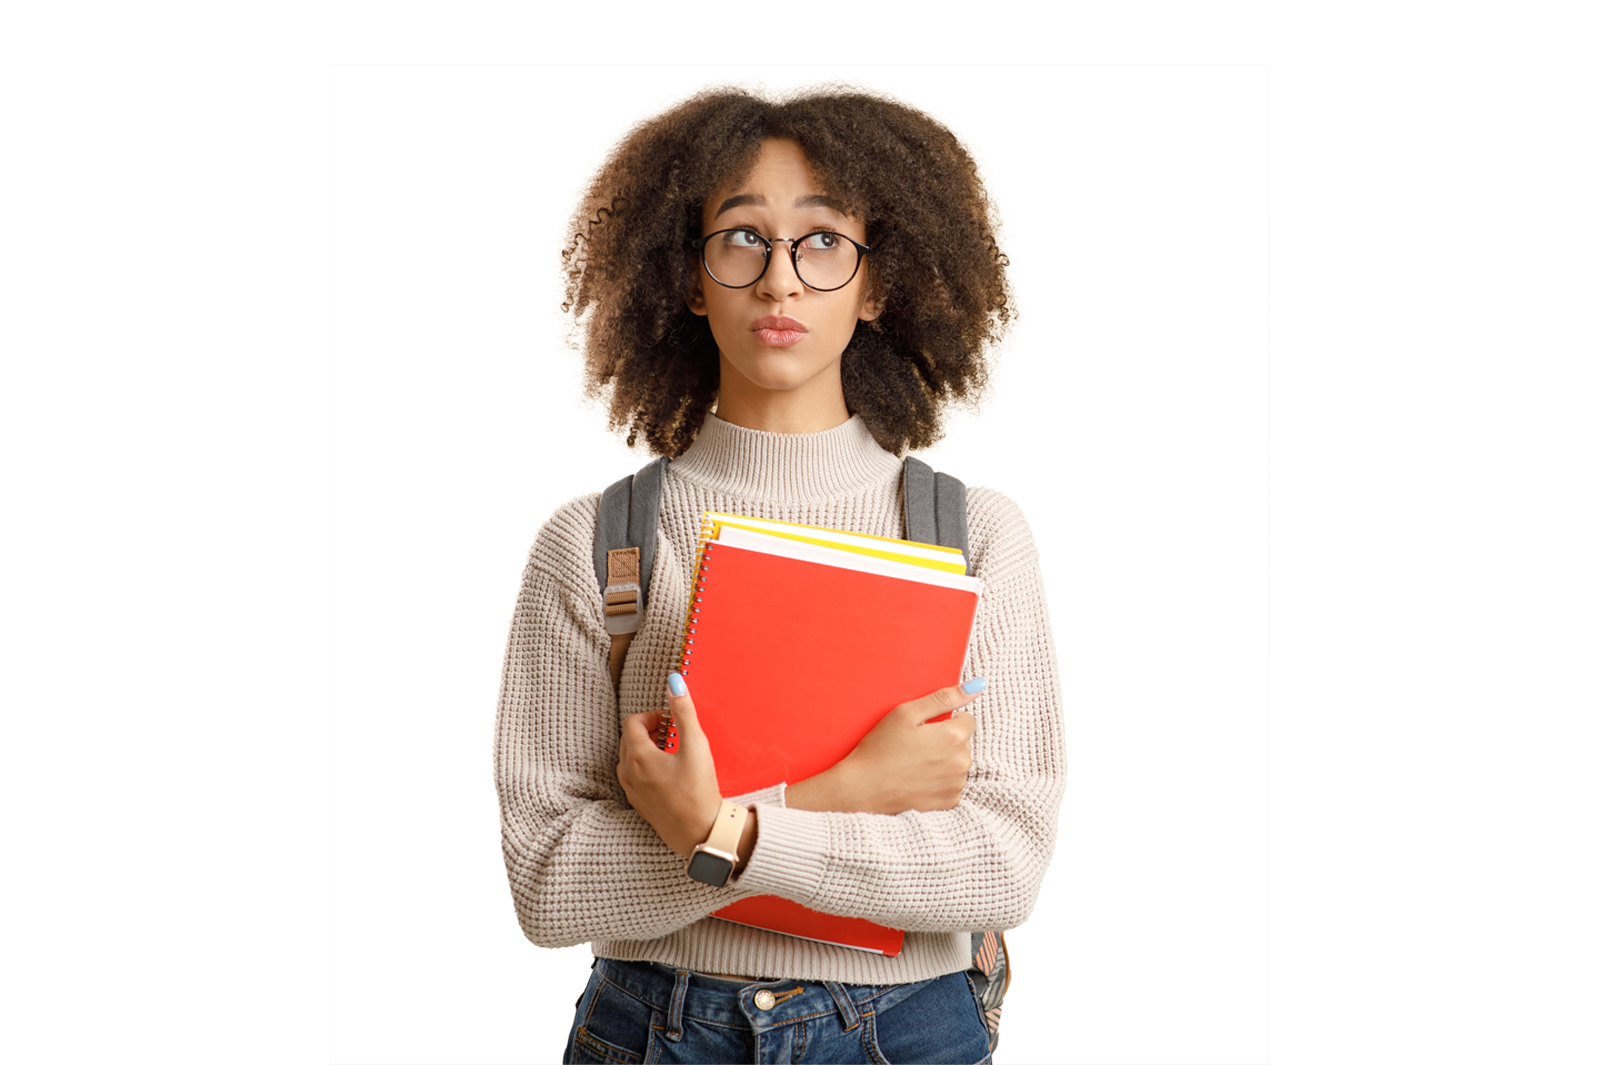 A young student with curly hair and glasses, holding notebooks relevant to education planning, wearing a backpack, looks thoughtful